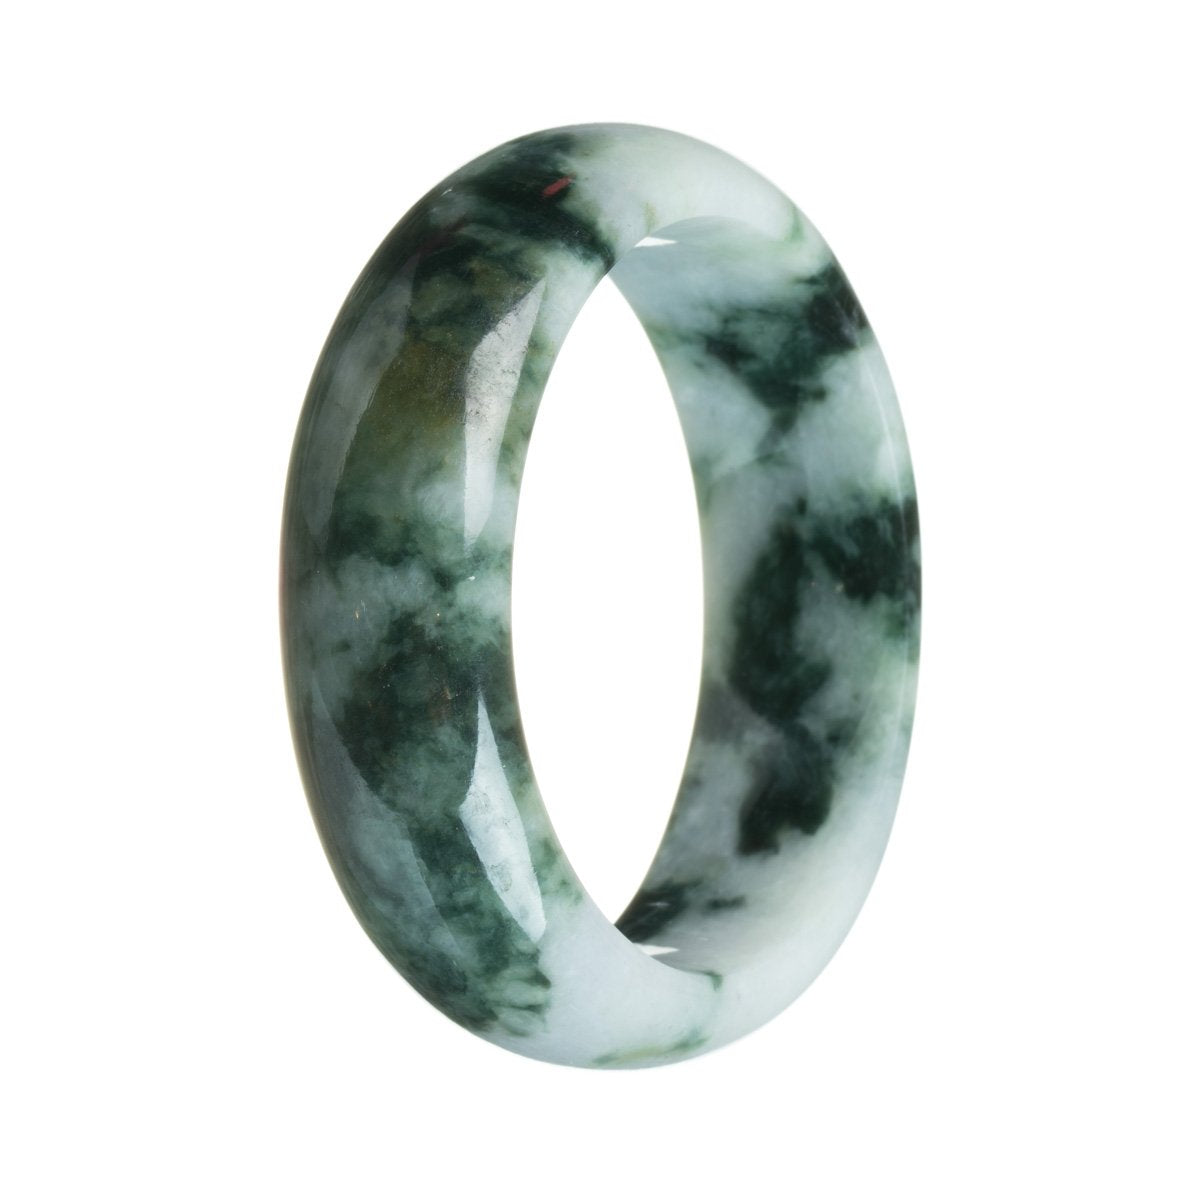 A close-up image of a genuine Type A Green on white pattern Jadeite Bangle. The bangle is in the shape of a half moon and measures 61mm in diameter. It is a high-quality piece from the MAYS™ collection.